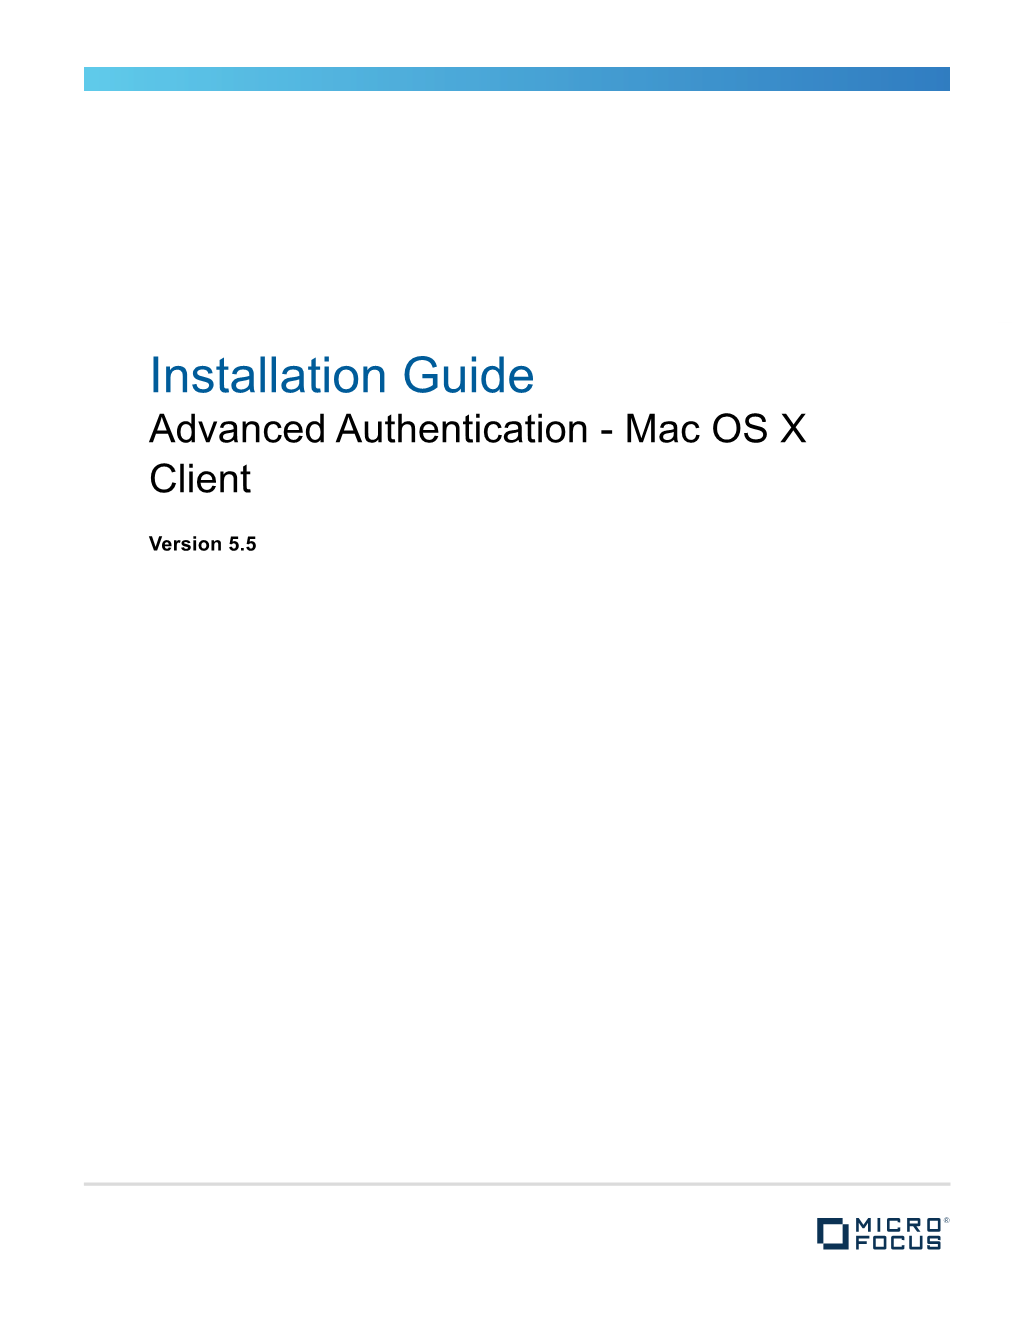 Installation Guide Advanced Authentication - Mac OS X Client